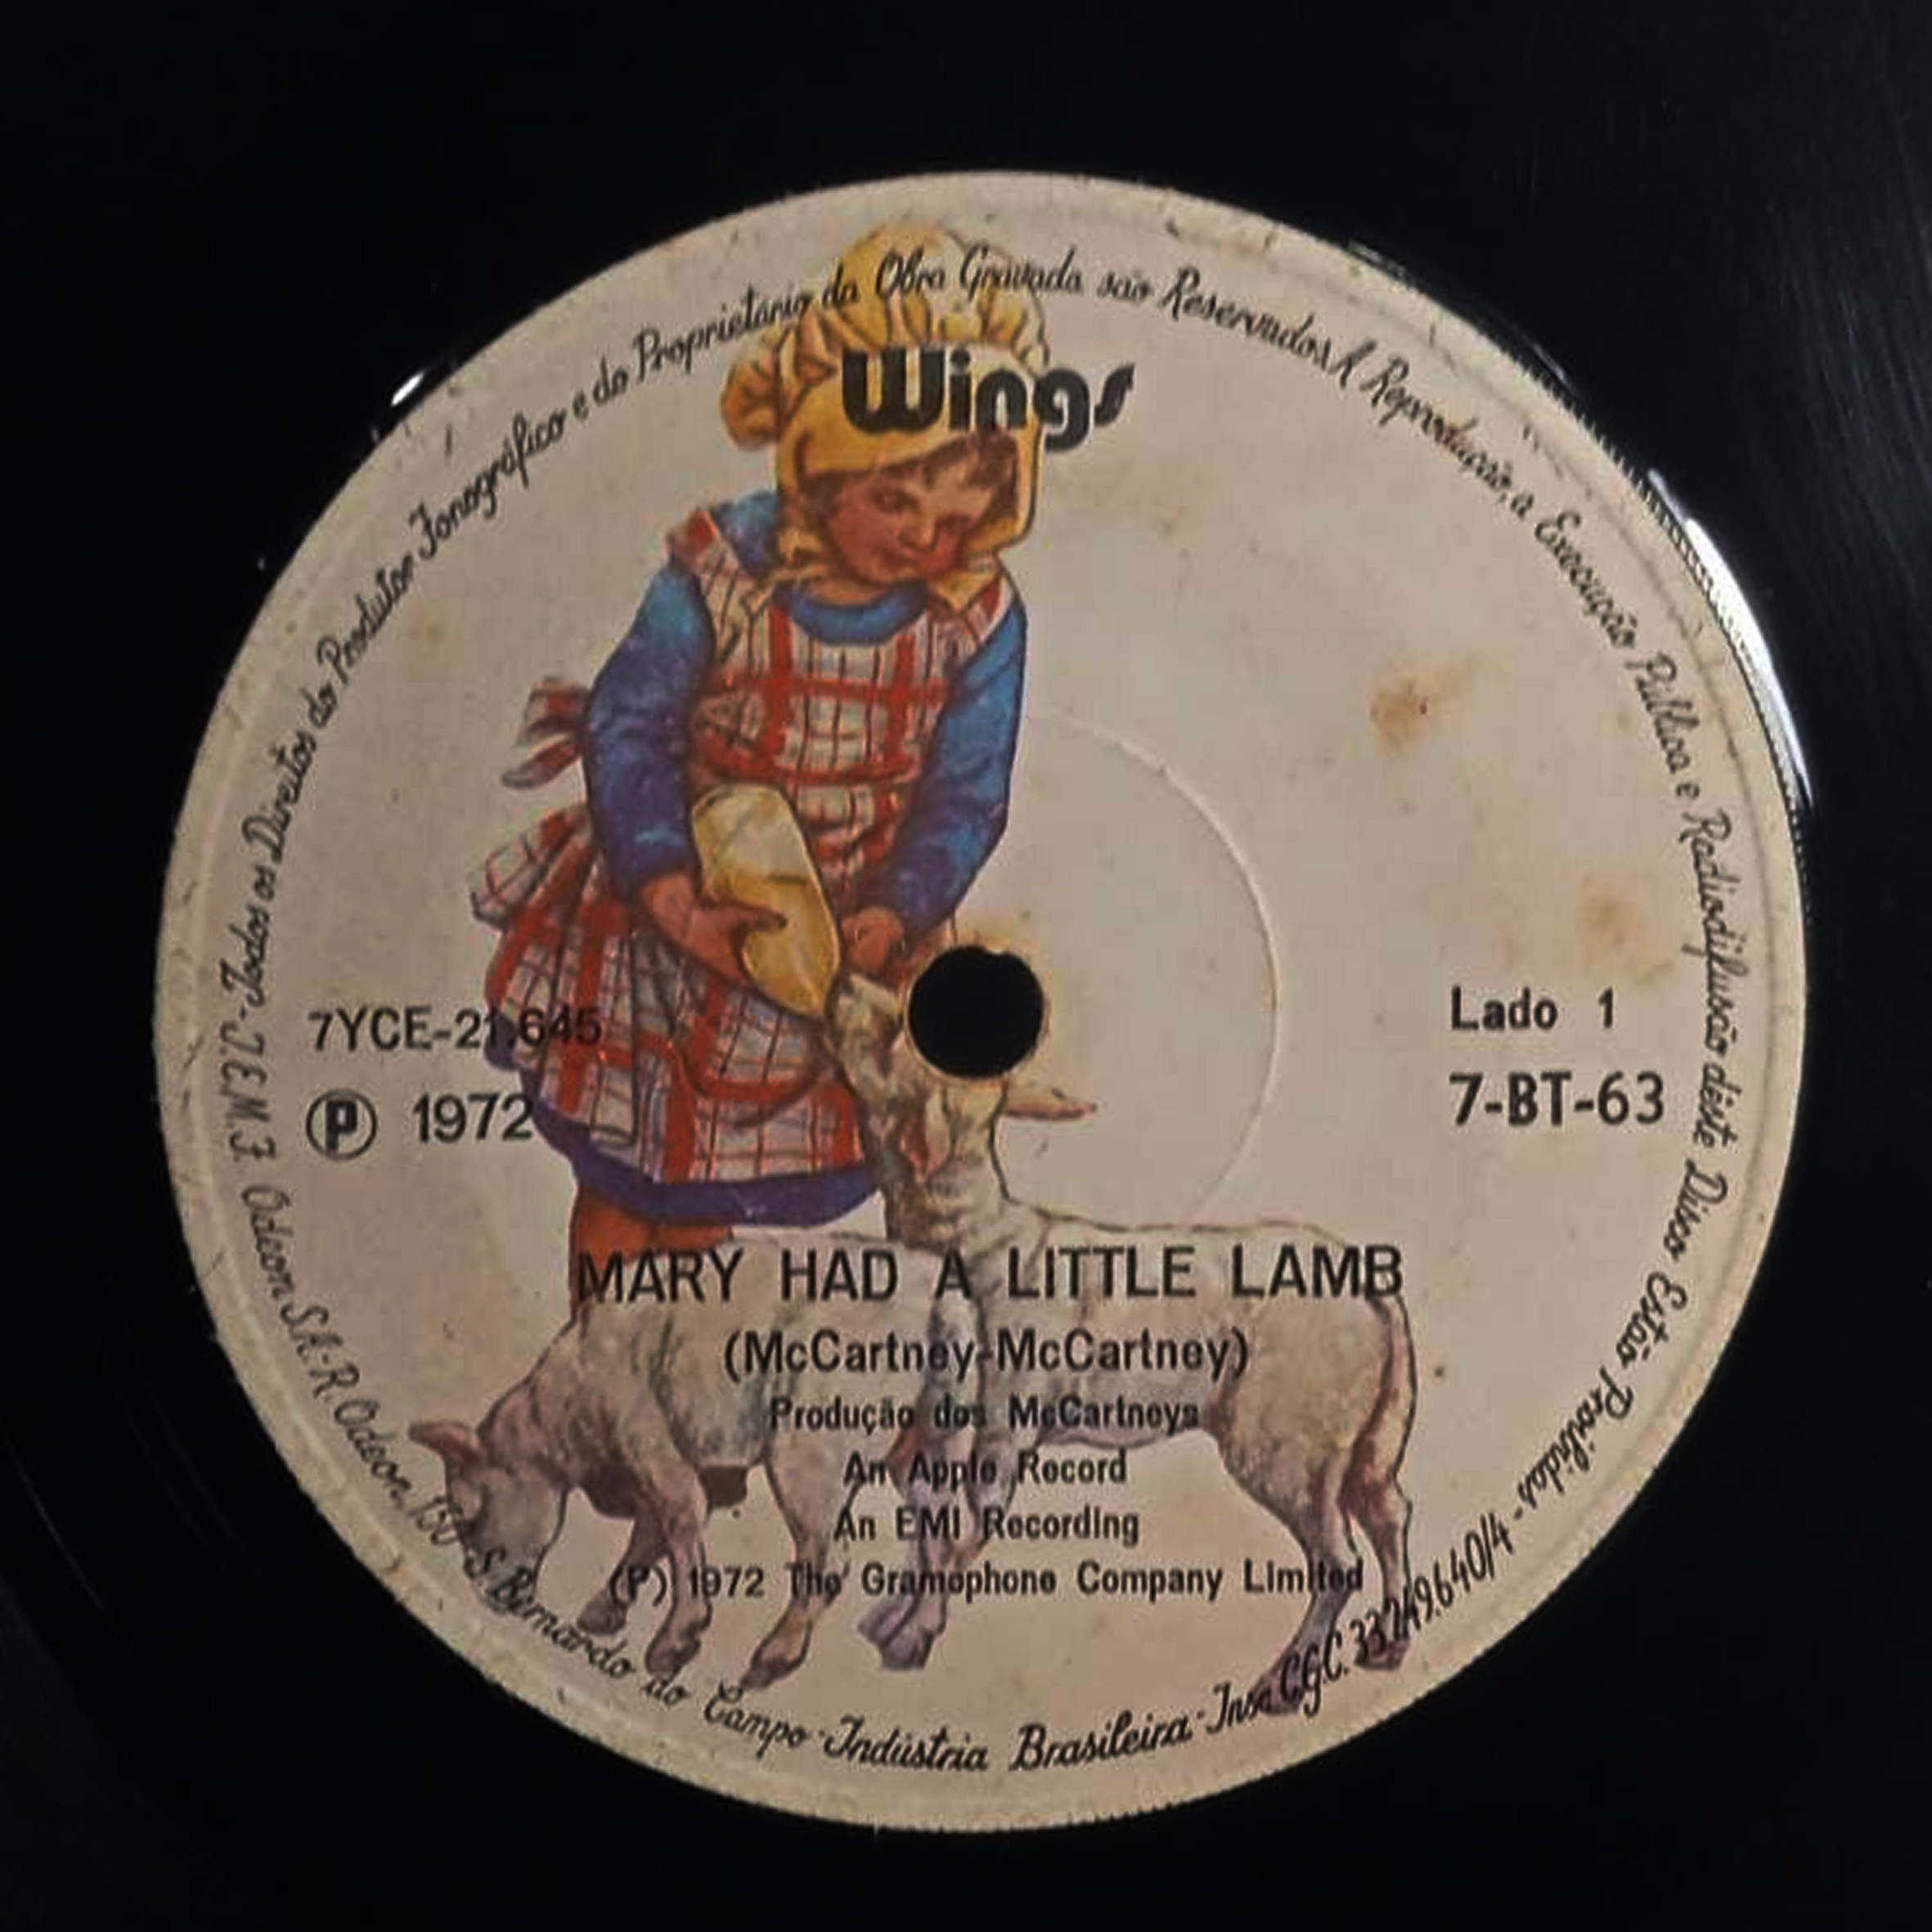 Vinil Compacto - Paul McCartney and Wings - Mary Had A Little Lamb